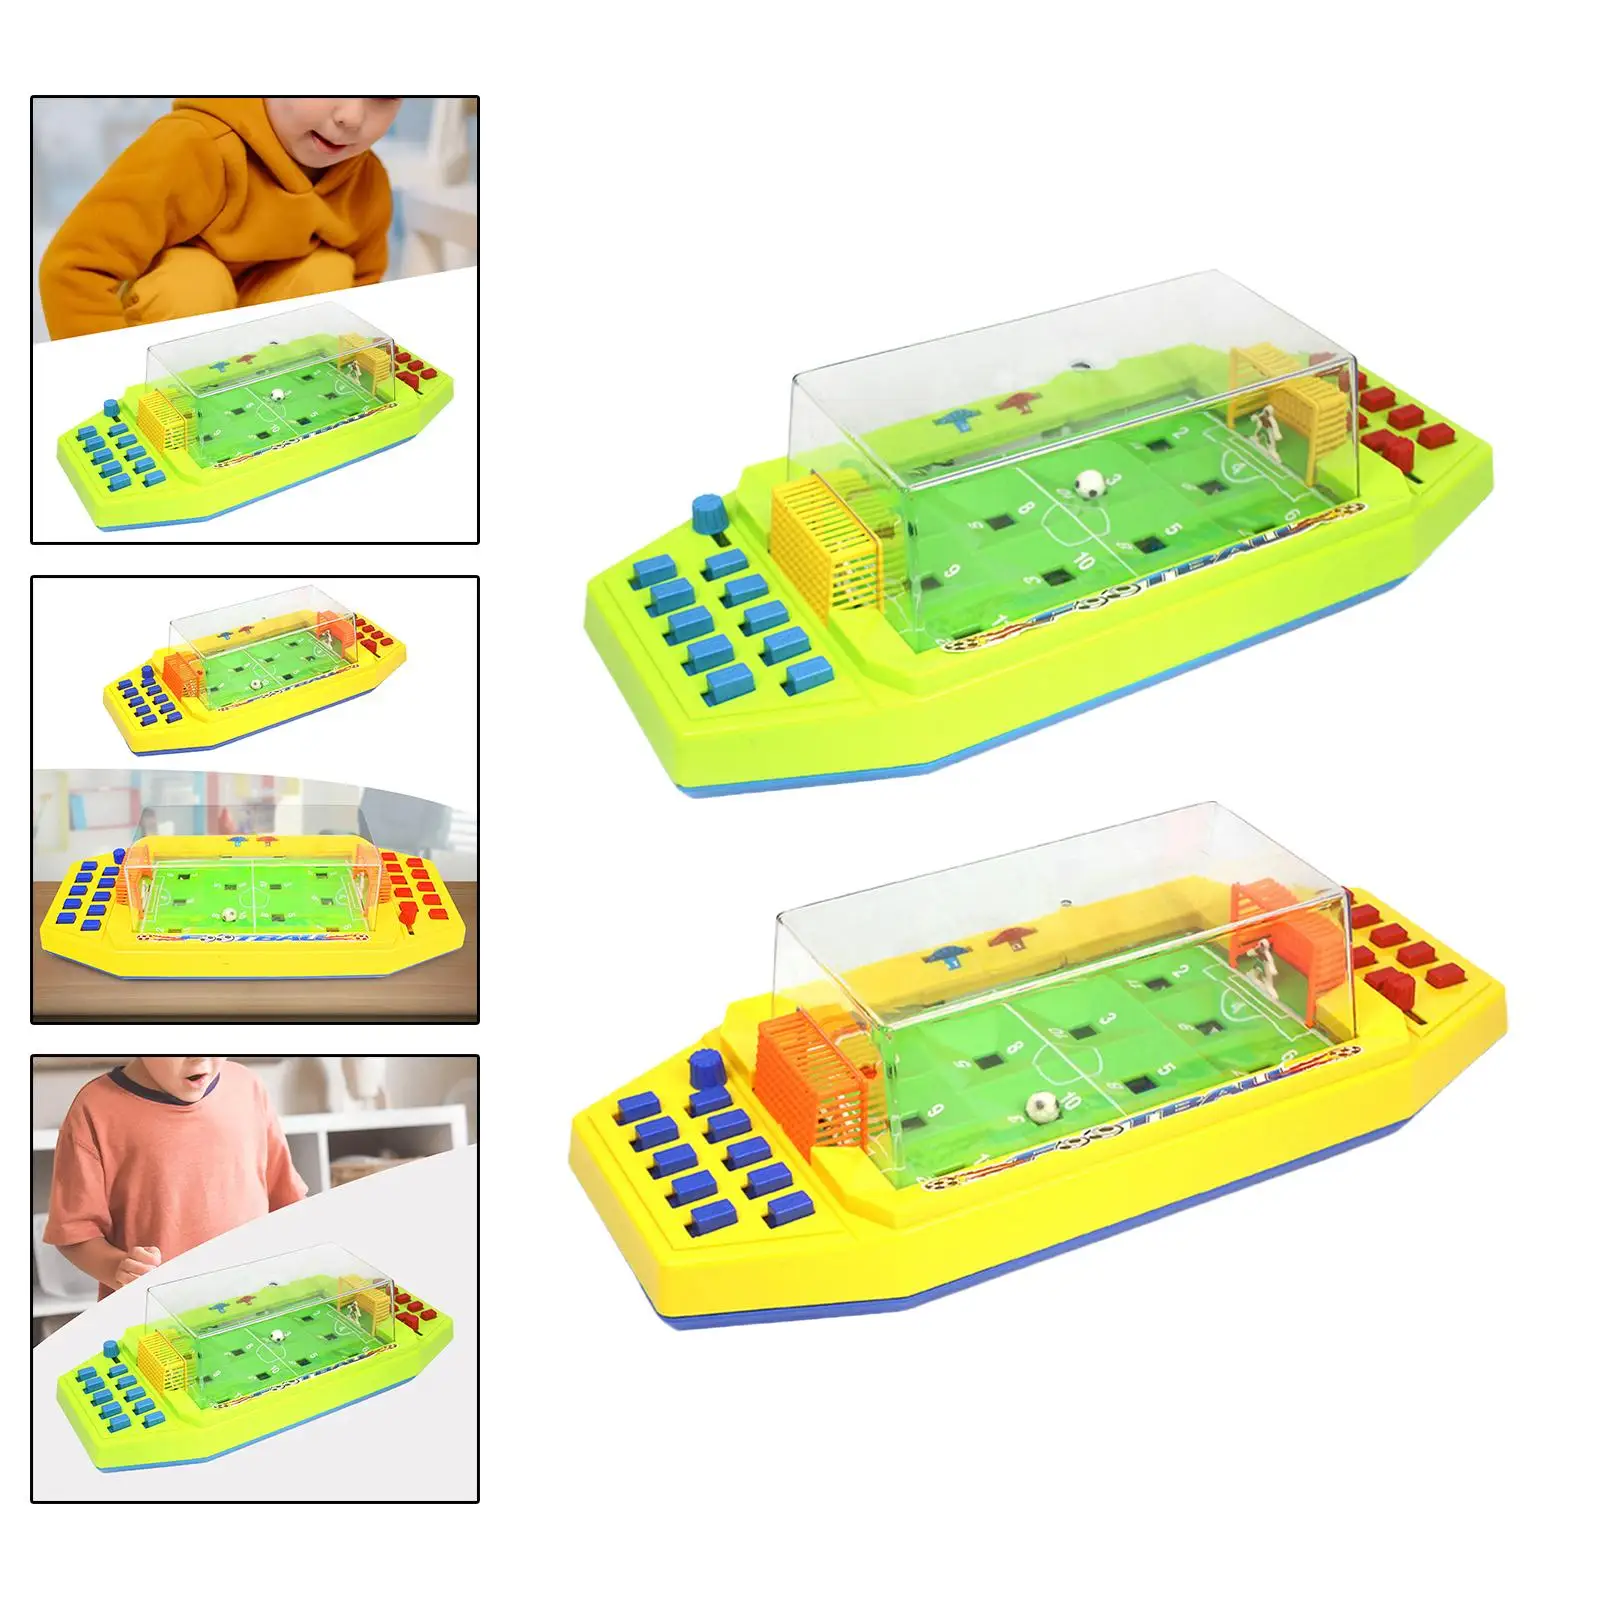 Football Board Game Interactive Sport Board Game Mini Tabletop Football Two Players for Party Playroom Family Game